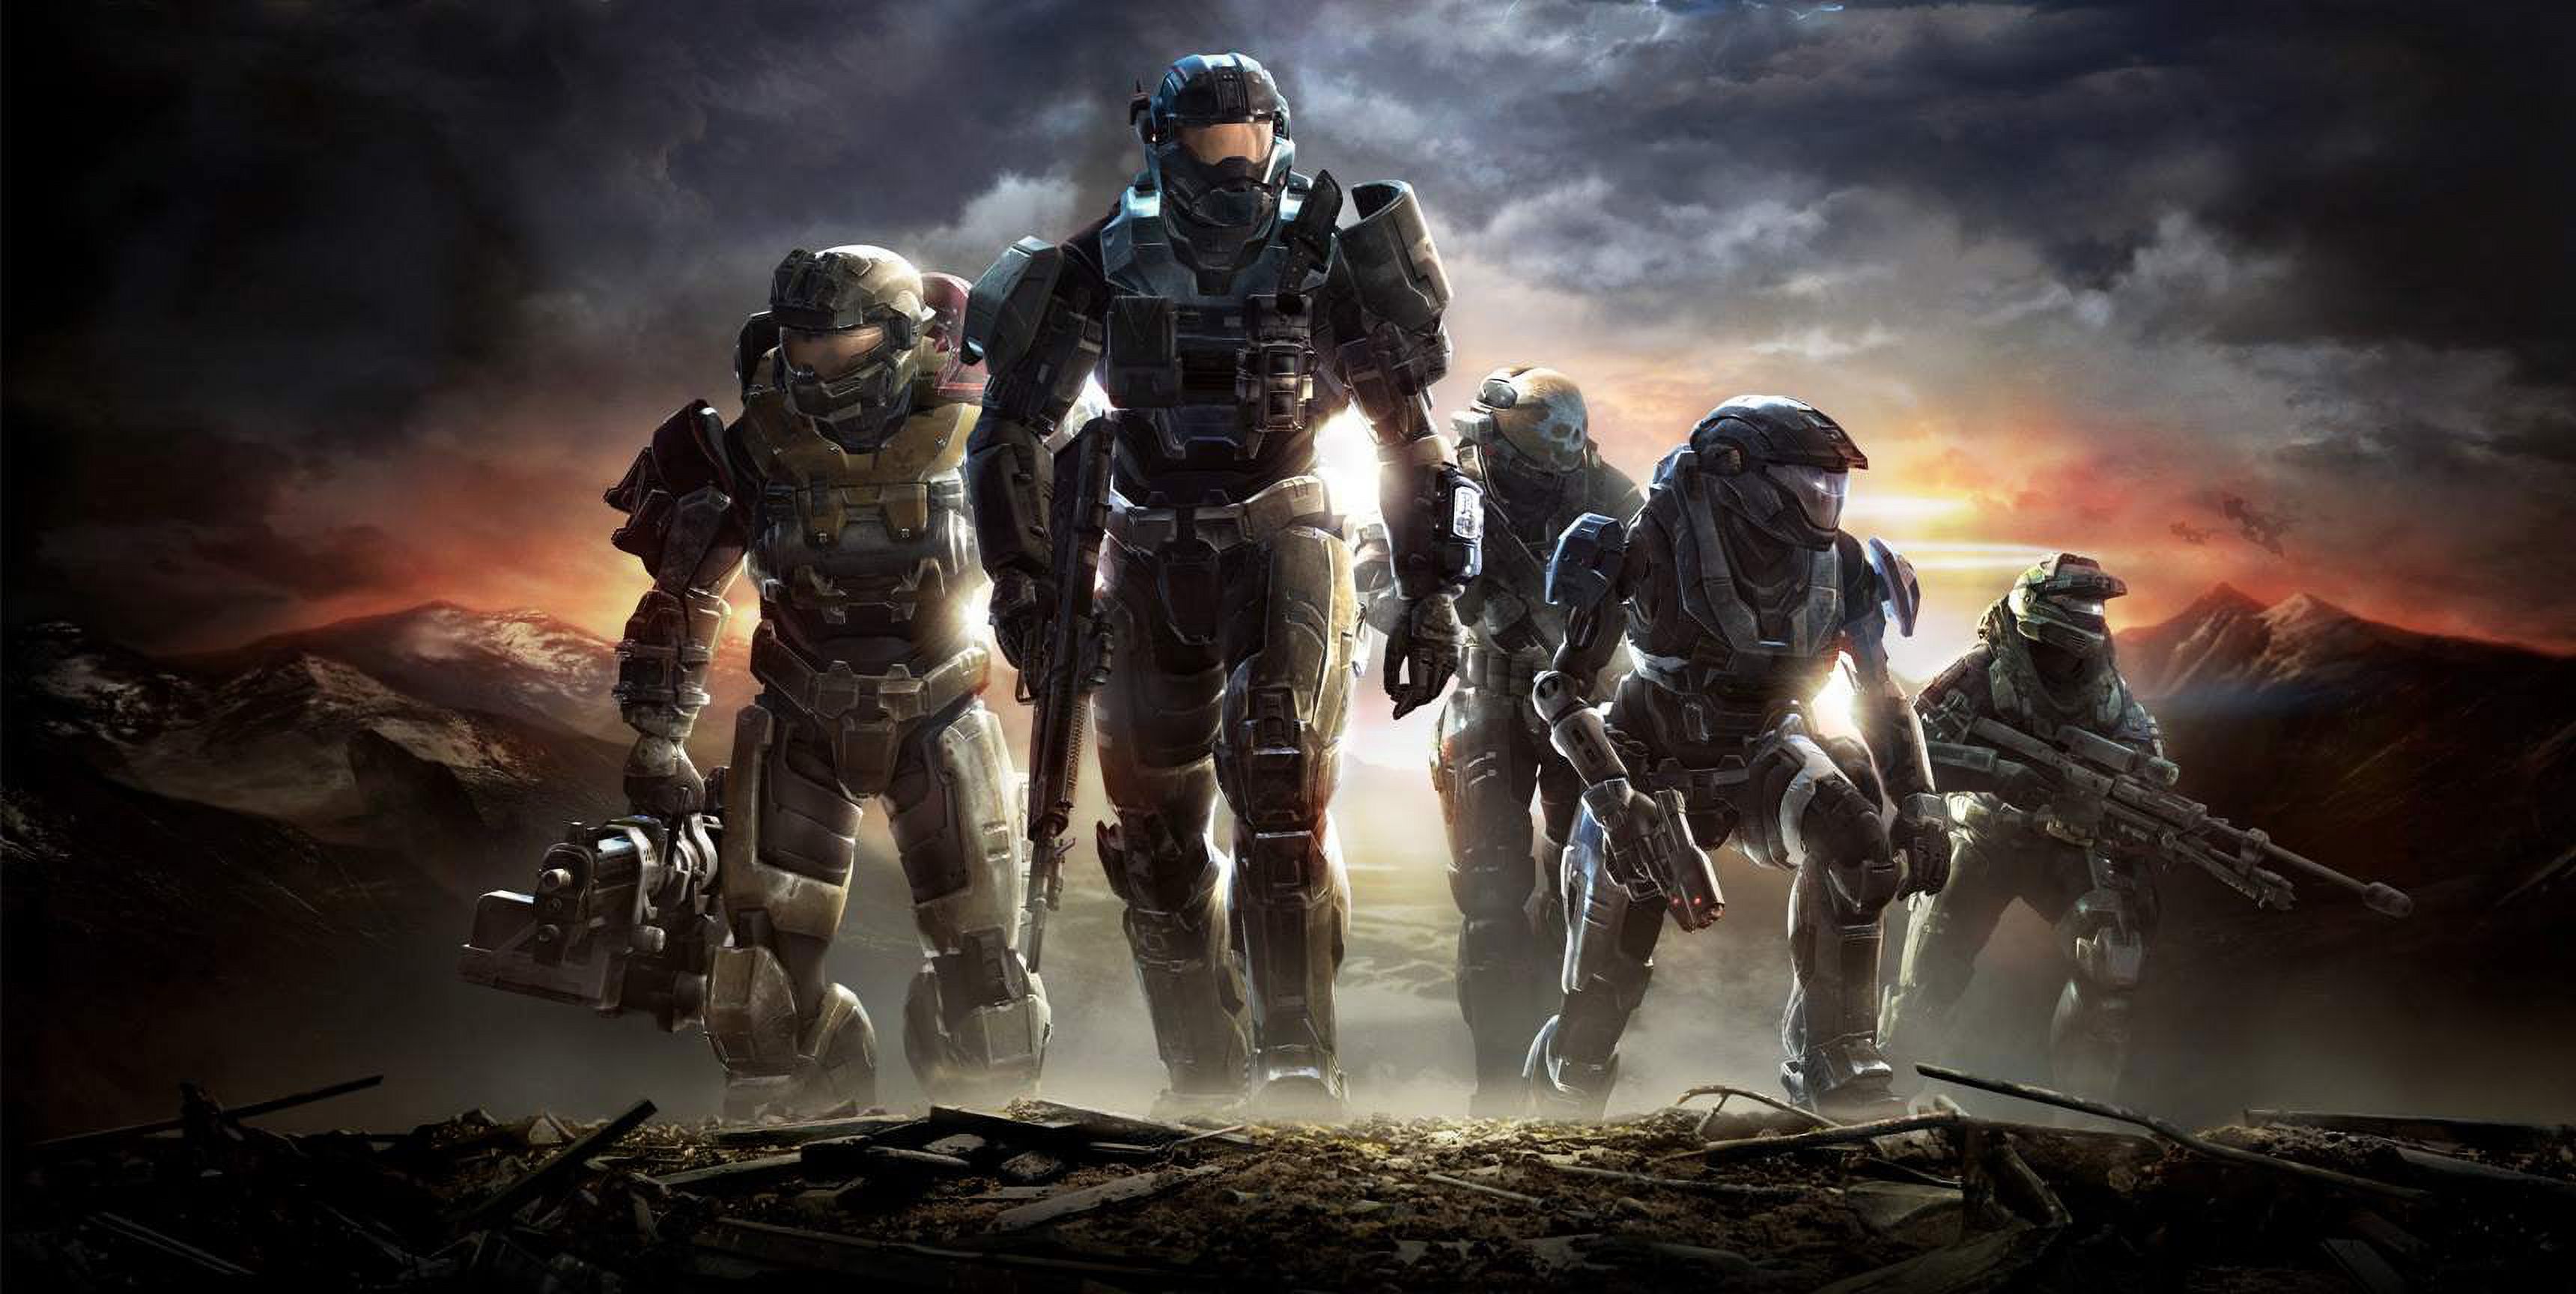 Halo Reach - Xbox 360 Game - image 3 of 5